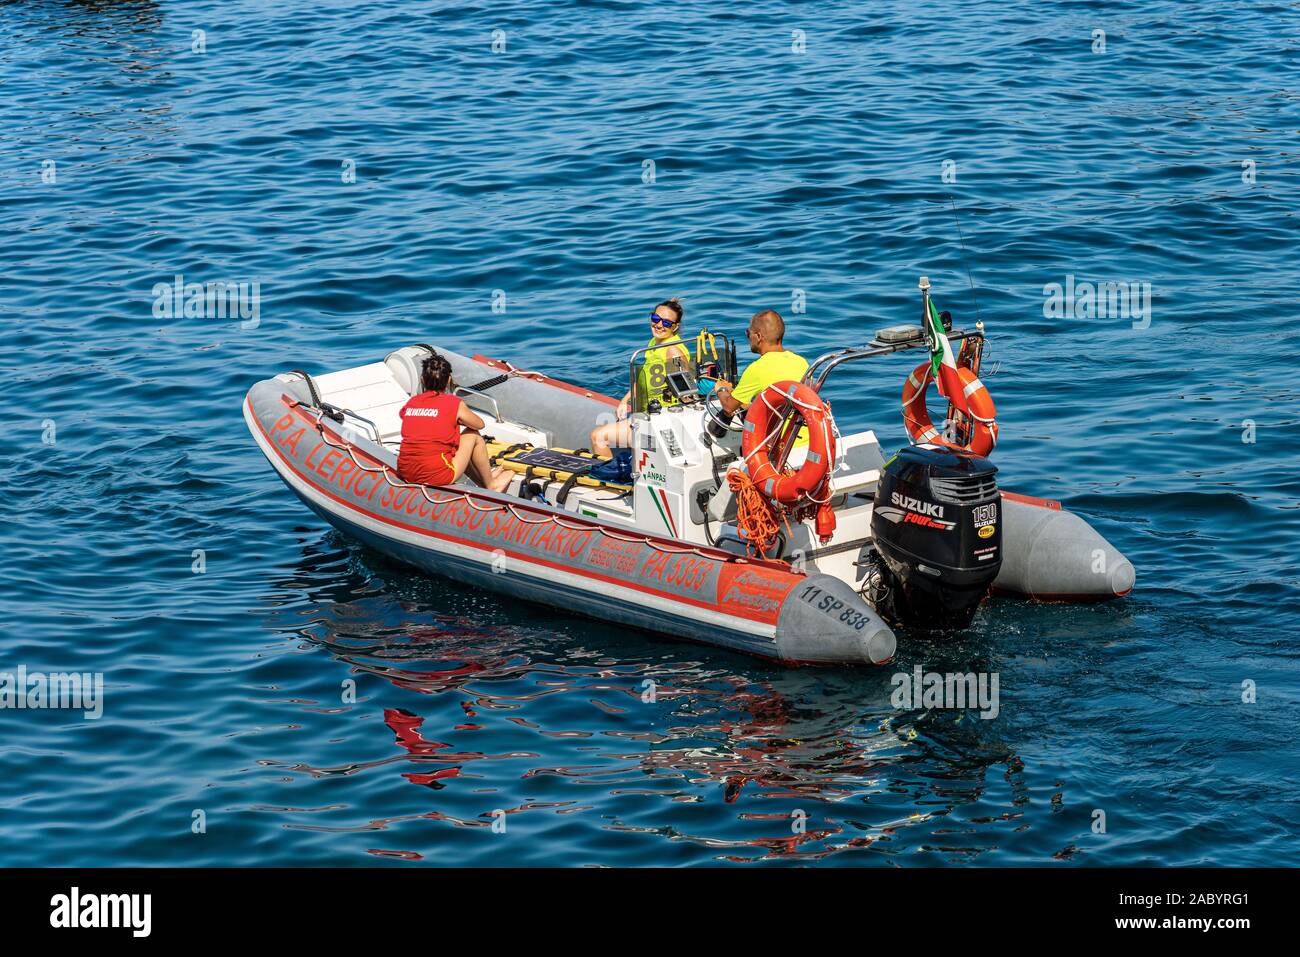 Water ambulance, small motor boat for emergency first aid with three people on board in the Mediterranean Sea, Gulf of La Spezia, Liguria, Italy Stock Photo